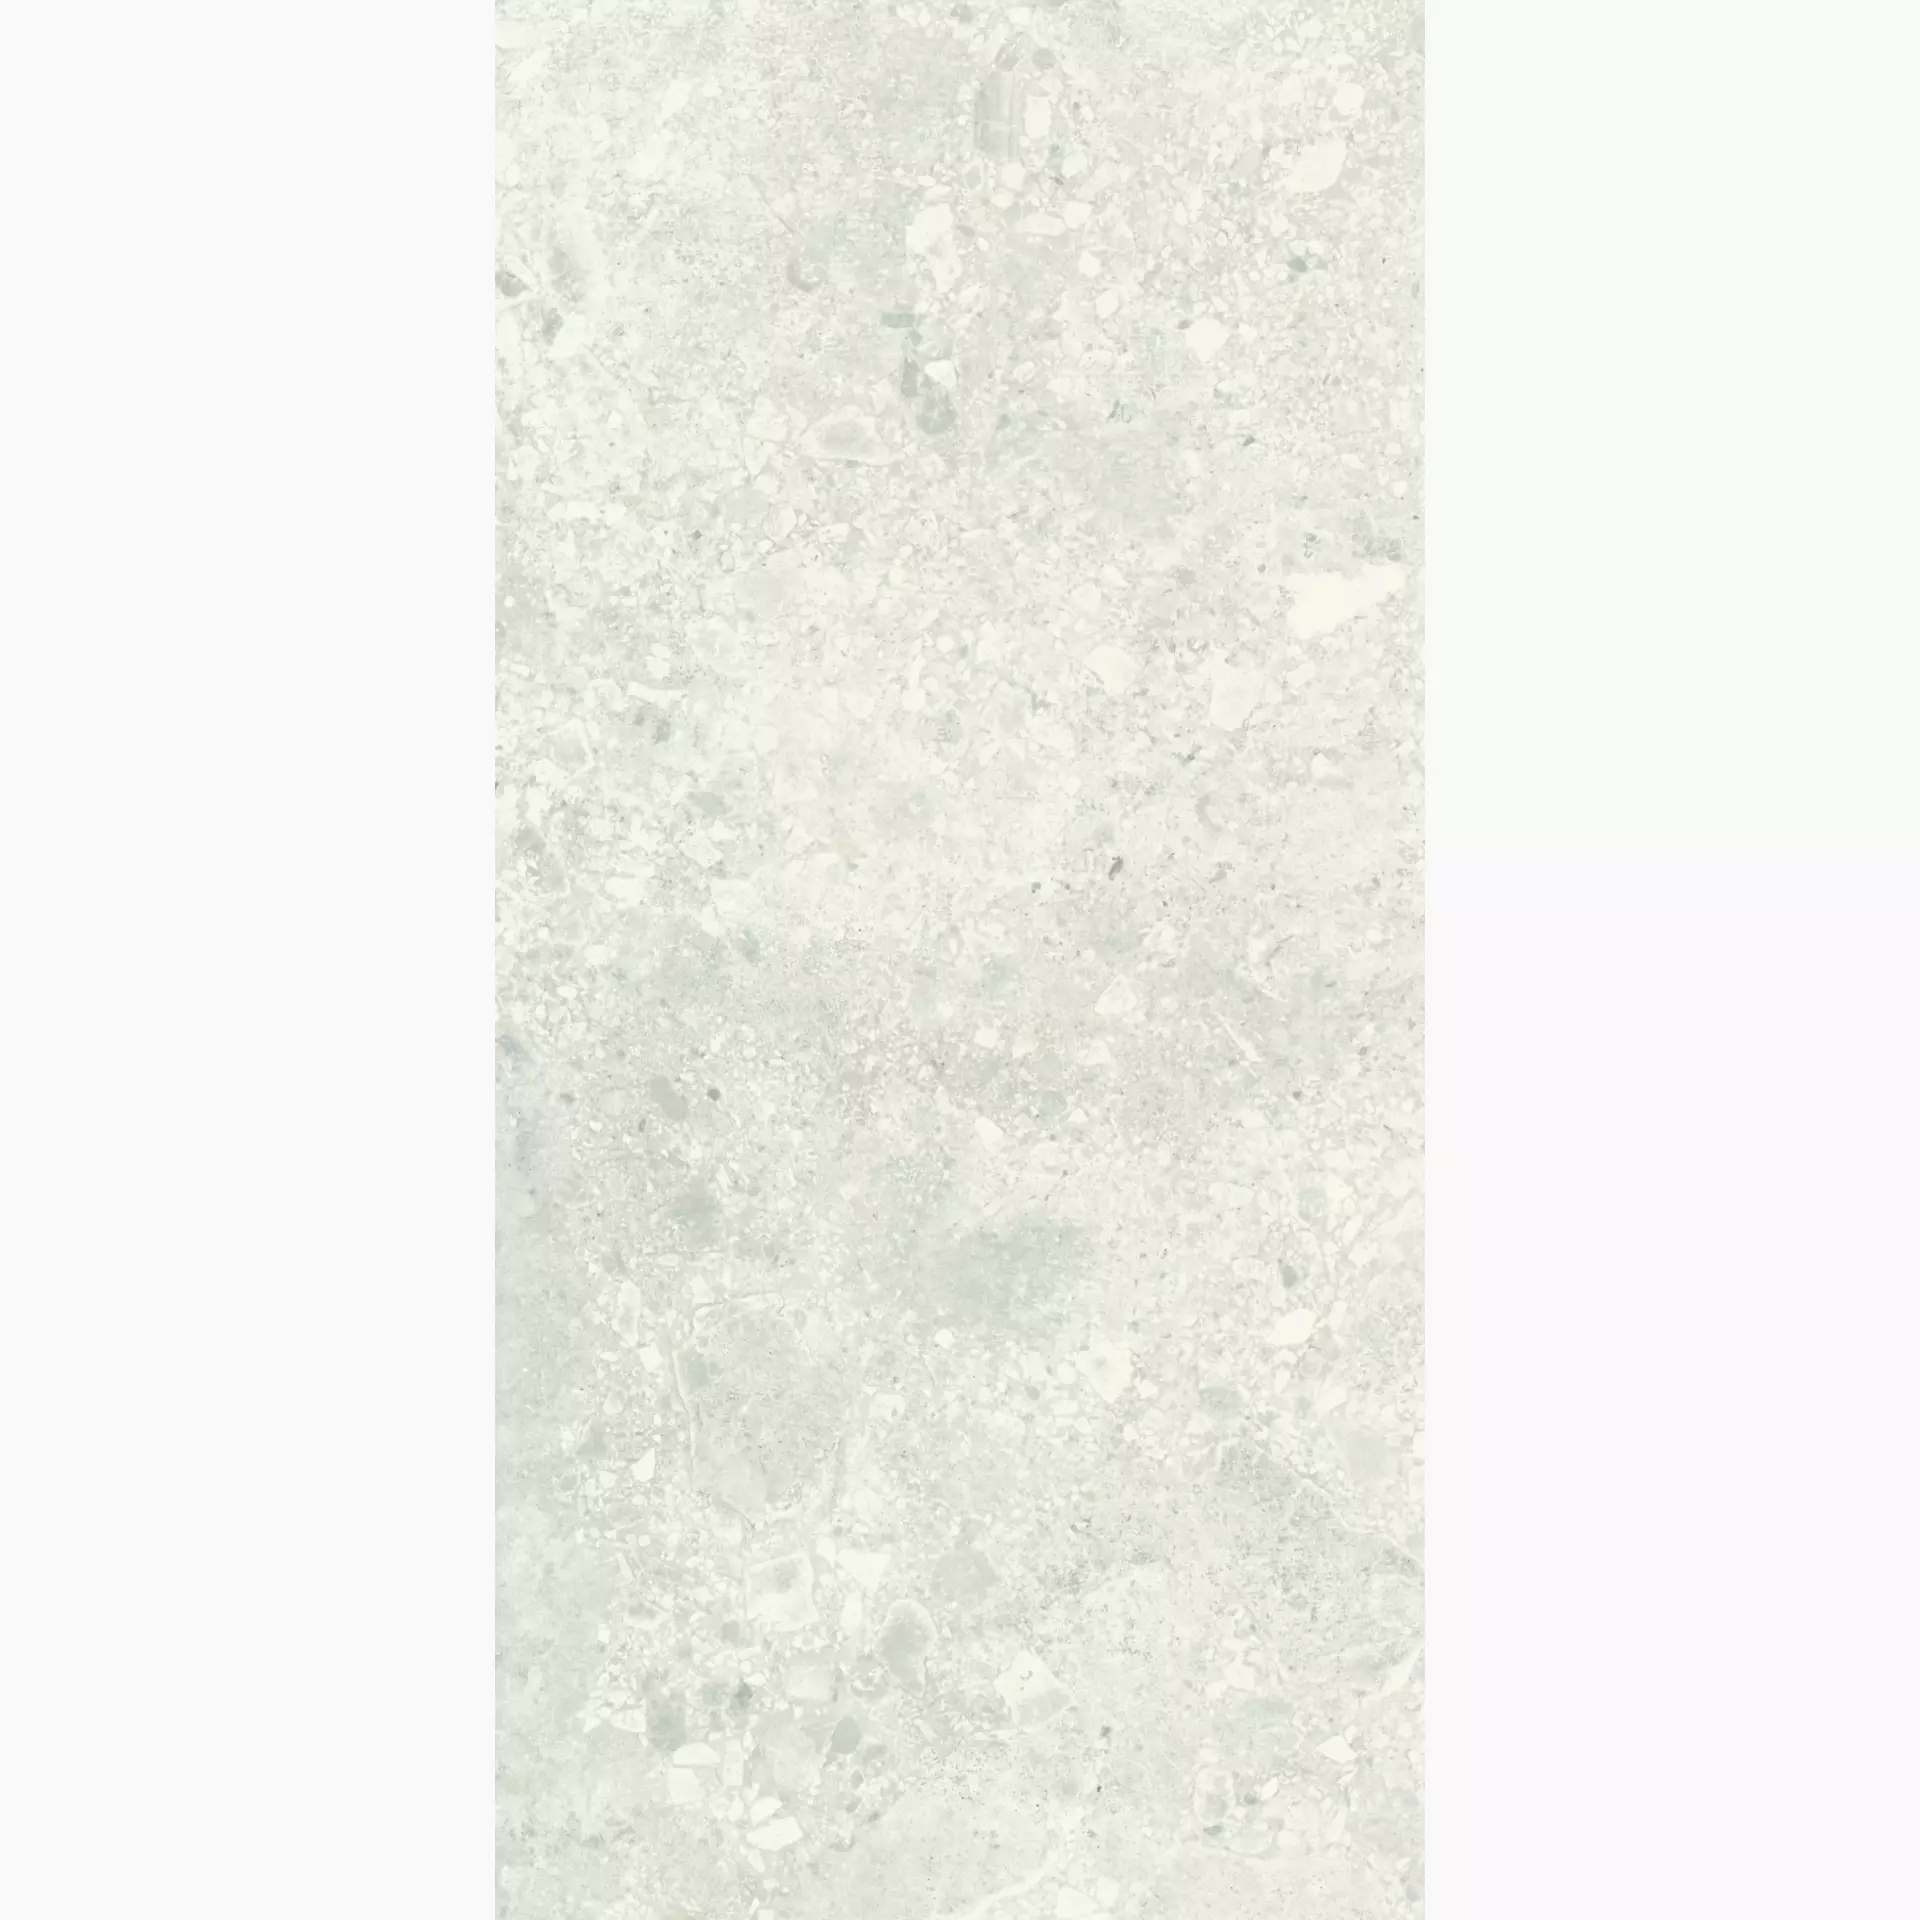 Magica Ceppo White Structured MACE01612N2 60x120cm rectified 20mm